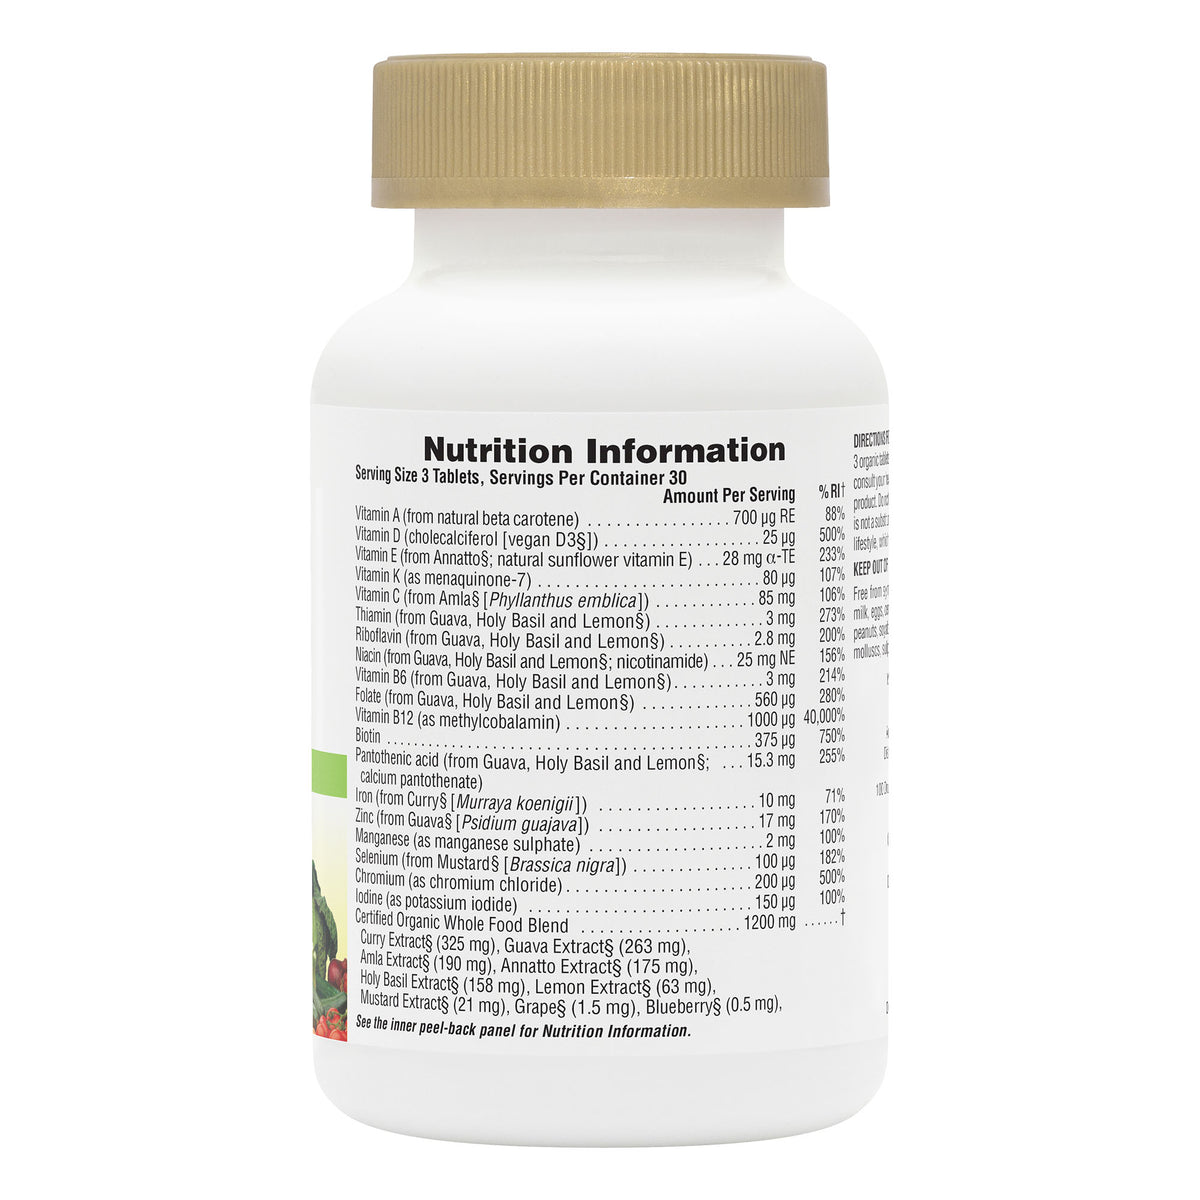 product image of Source of Life® Garden Women's Multivitamin Tablets containing Source of Life® Garden Women's Multivitamin Tablets